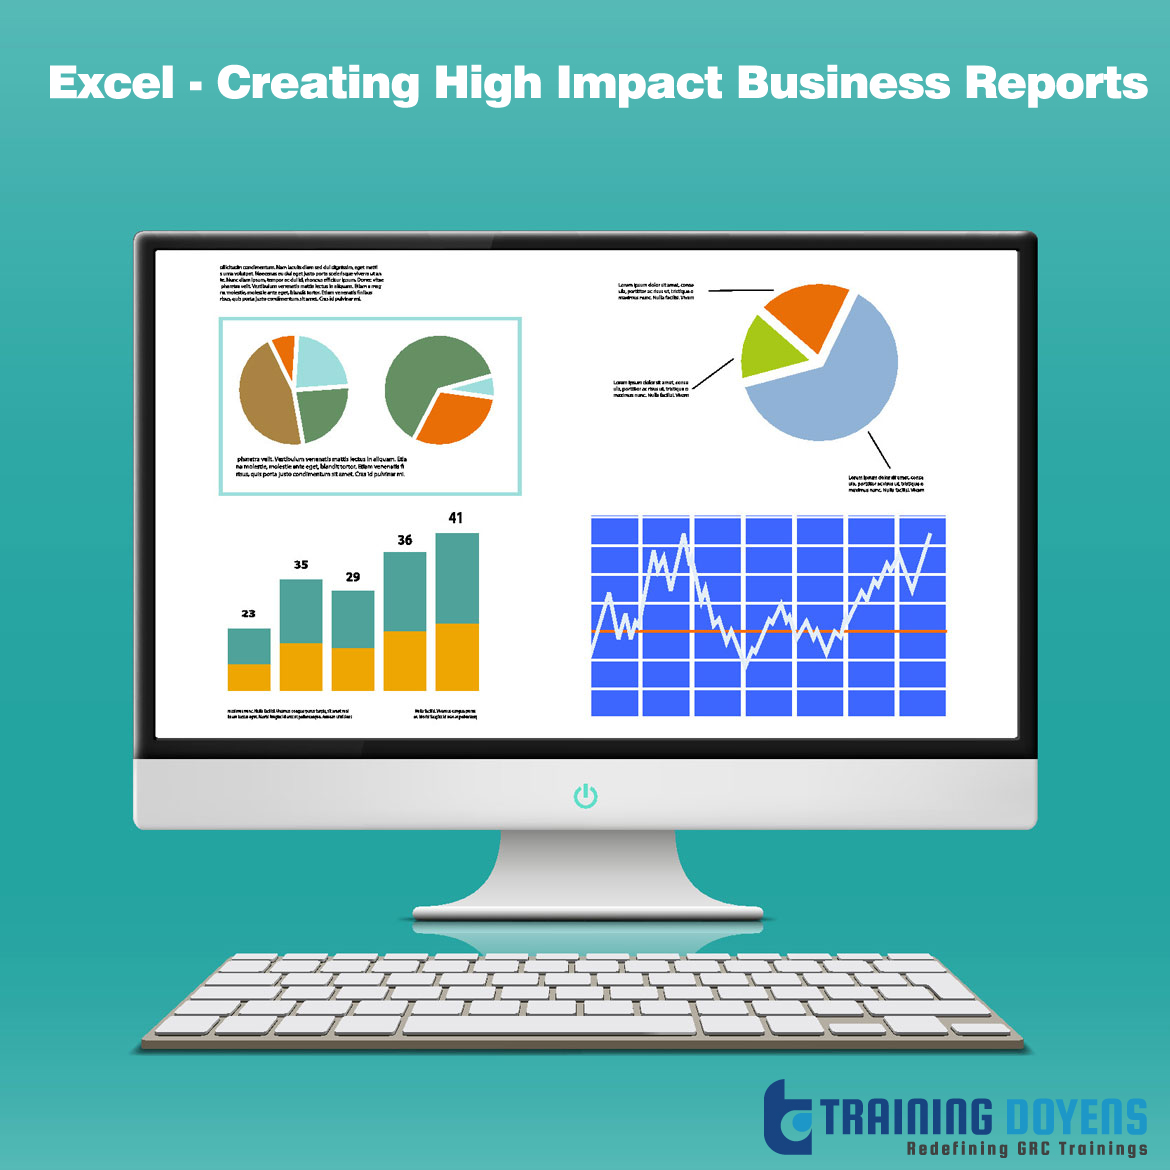 Excel - Creating High Impact Business Reports, Denver, Colorado, United States